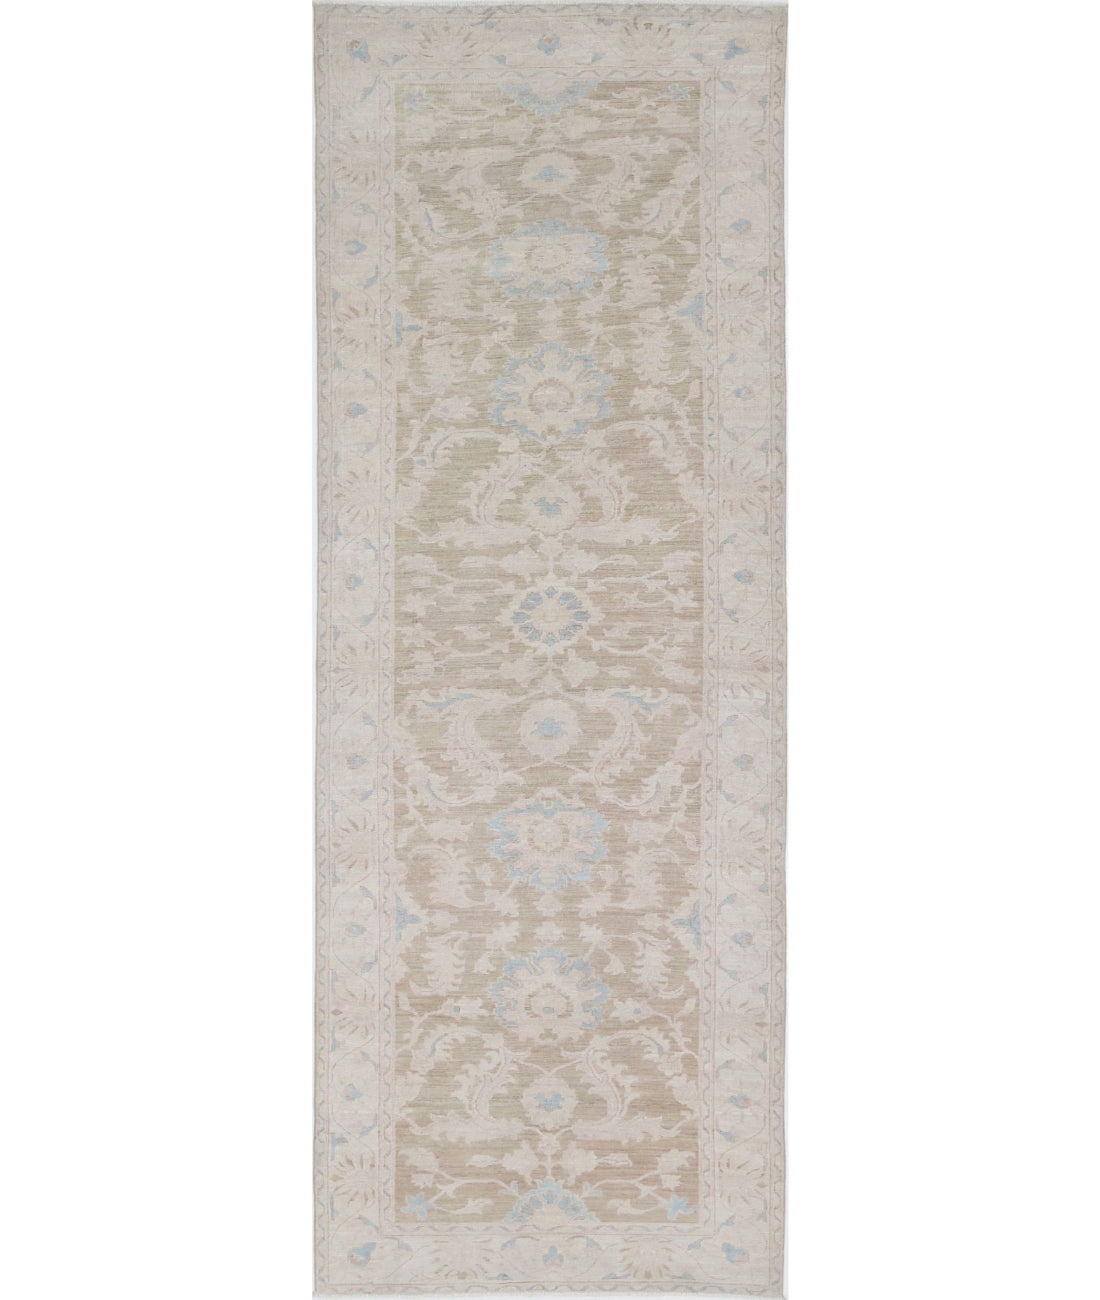 Hand Knotted Serenity Wool Rug - 4'2'' x 12'1'' 4'2'' x 12'1'' (125 X 363) / Green / Ivory